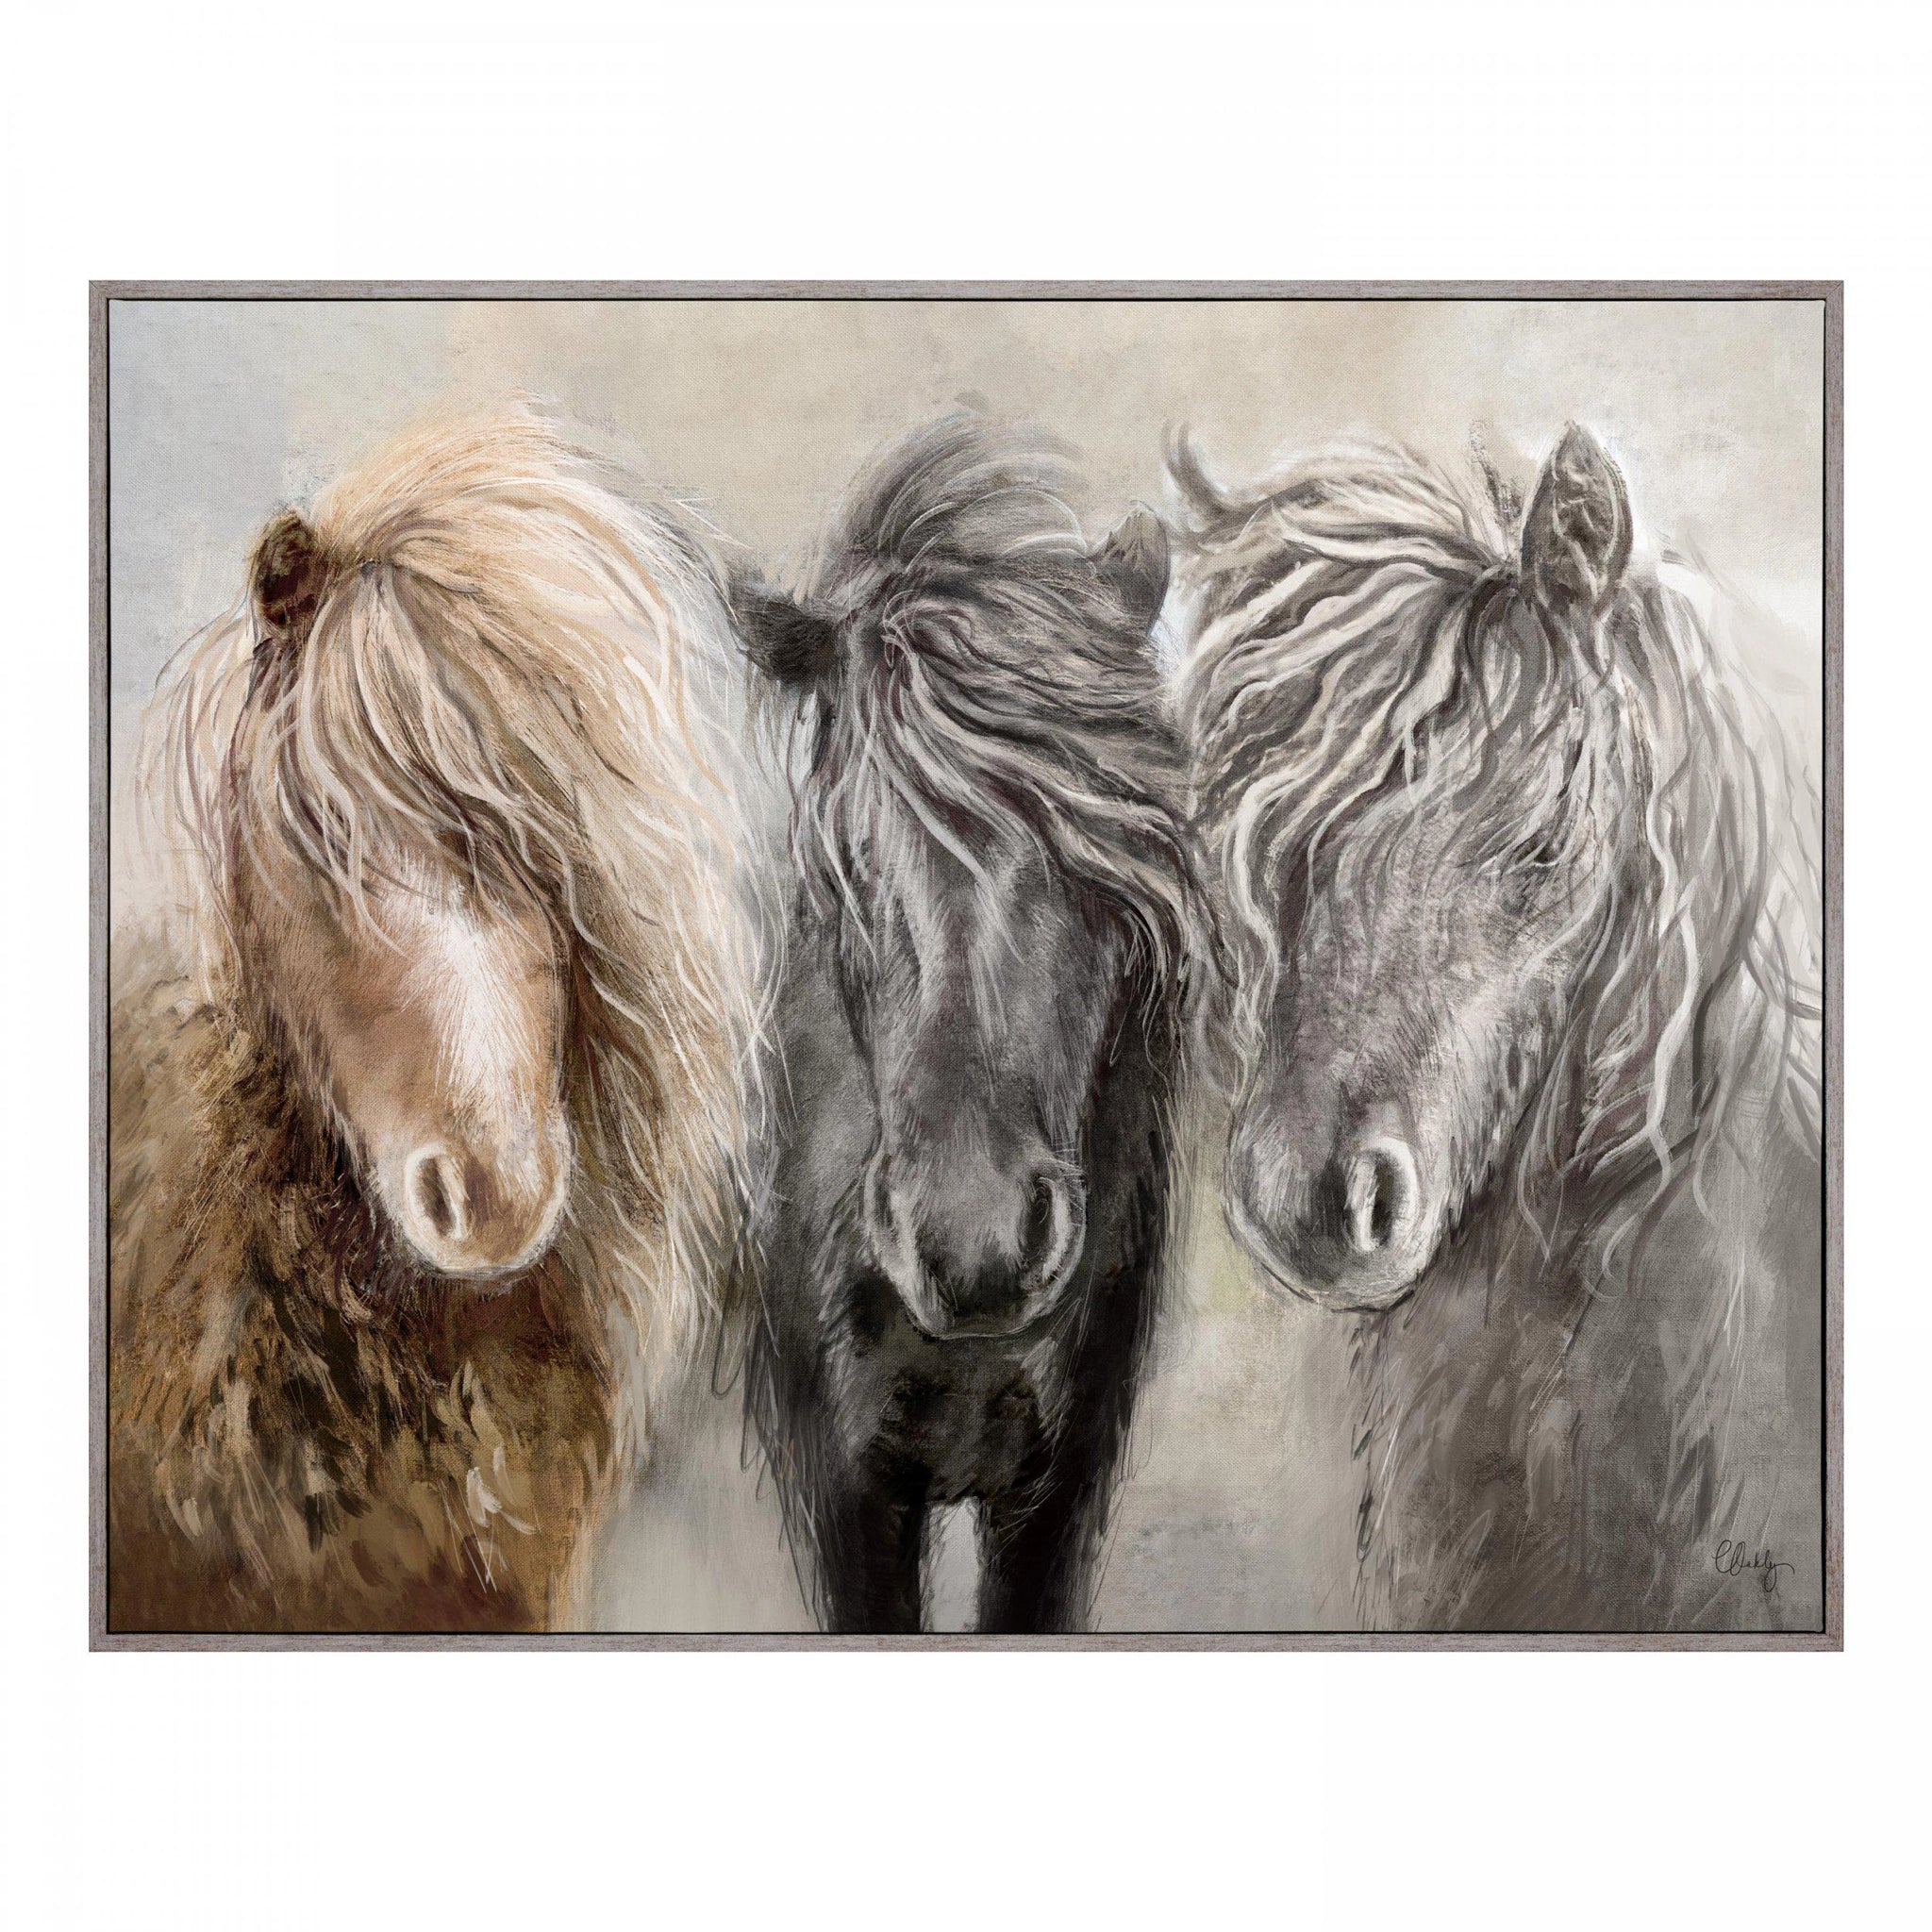 Framed canvas of three ponies in a row with an impressionist grey background of foliage.